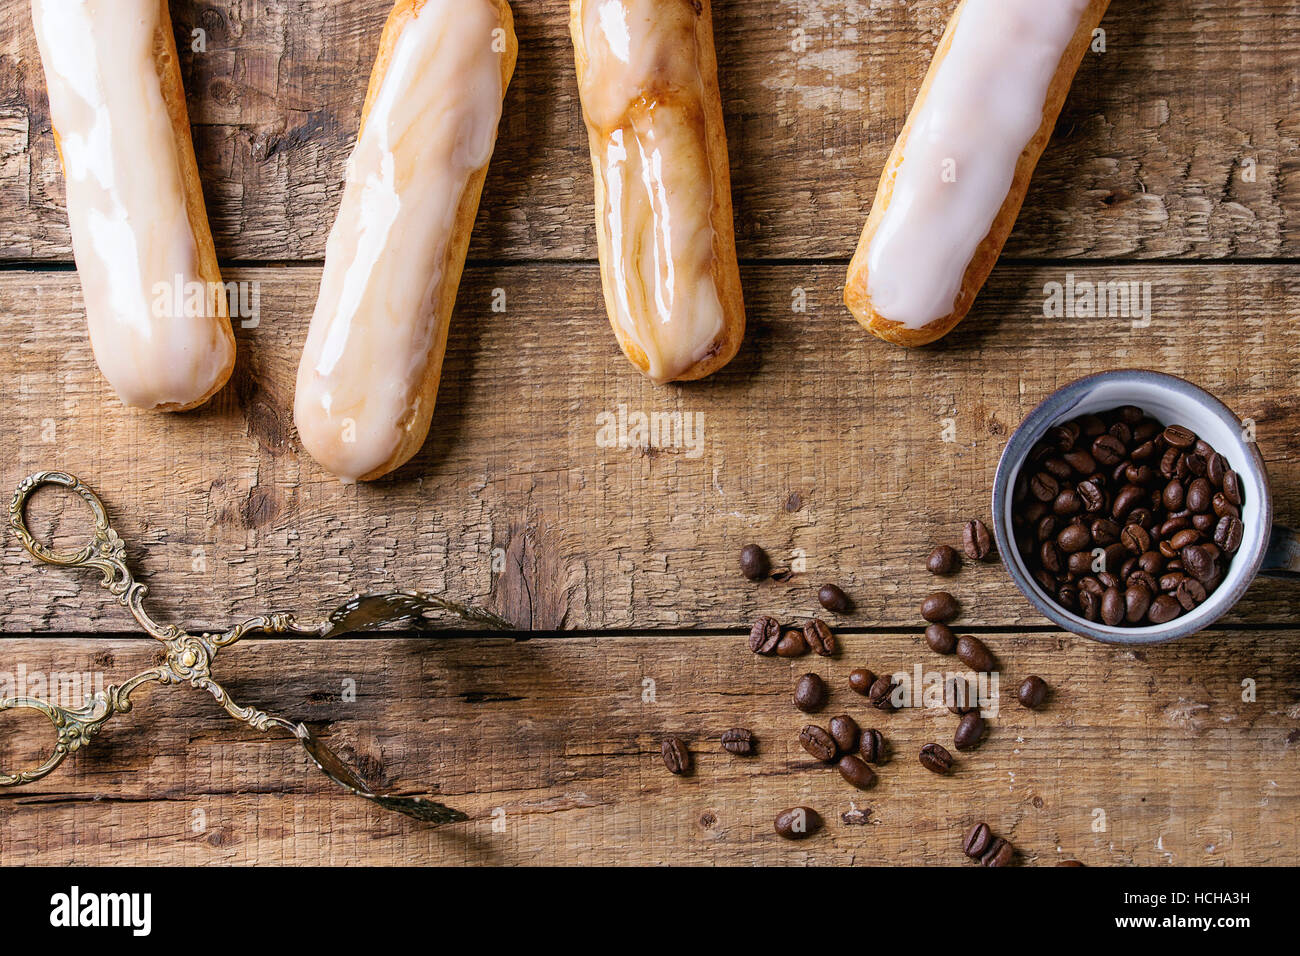 Fresh homemade Coffee eclairs with different glaze and coffee beans over old wooden texture background with space for text. Top view. Stock Photo